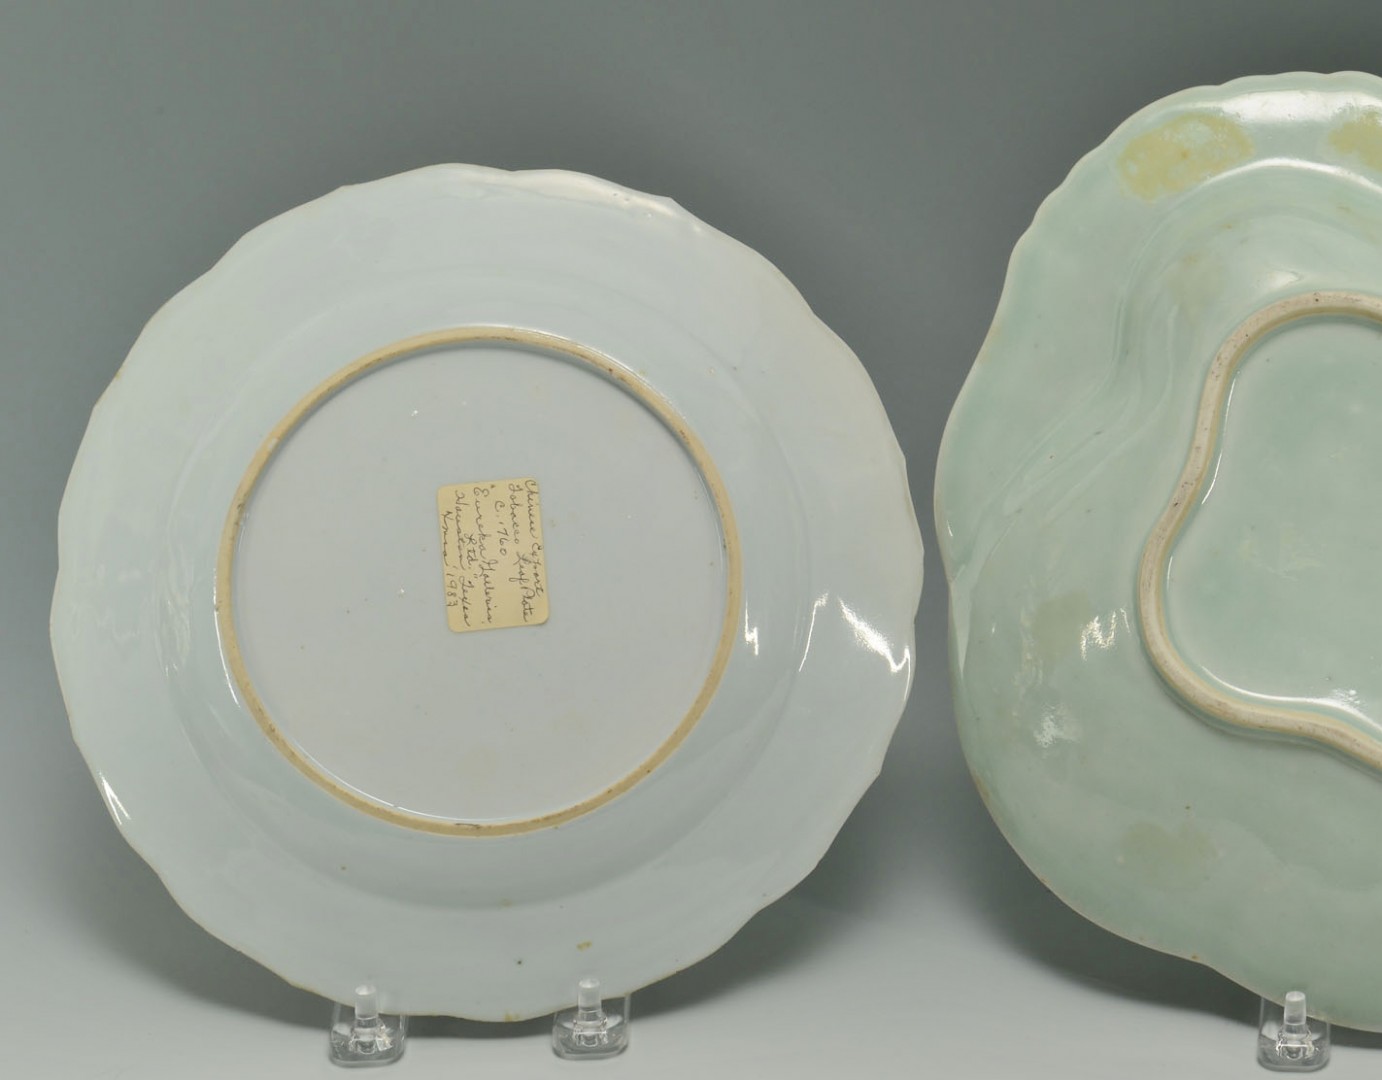 Lot 23: Grouping of 3 Chinese Porcelain Plates